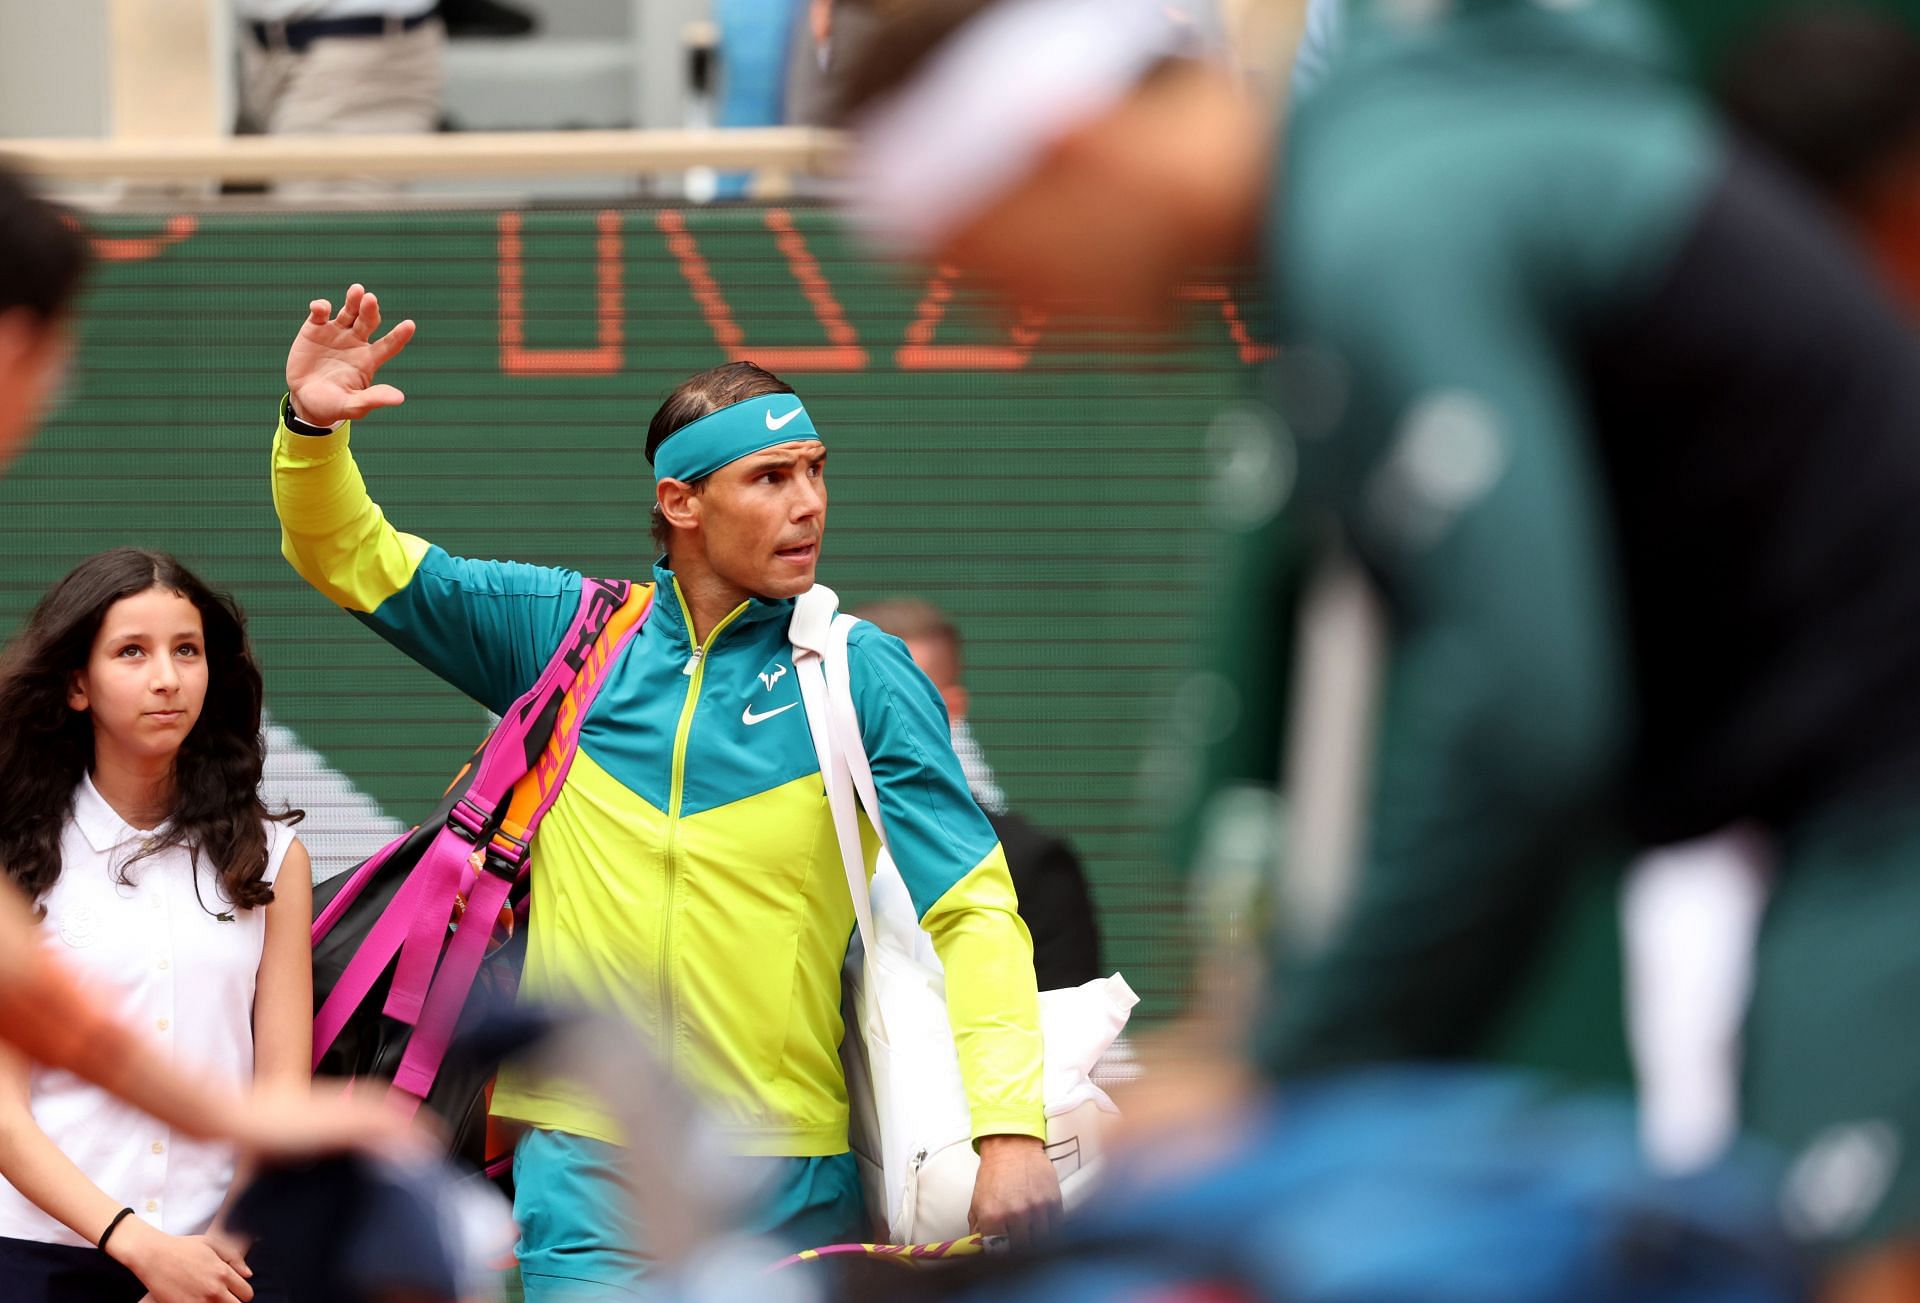 Rafael Nadal has successfully completeed two rounds of foot treatment heading into Wimbledon